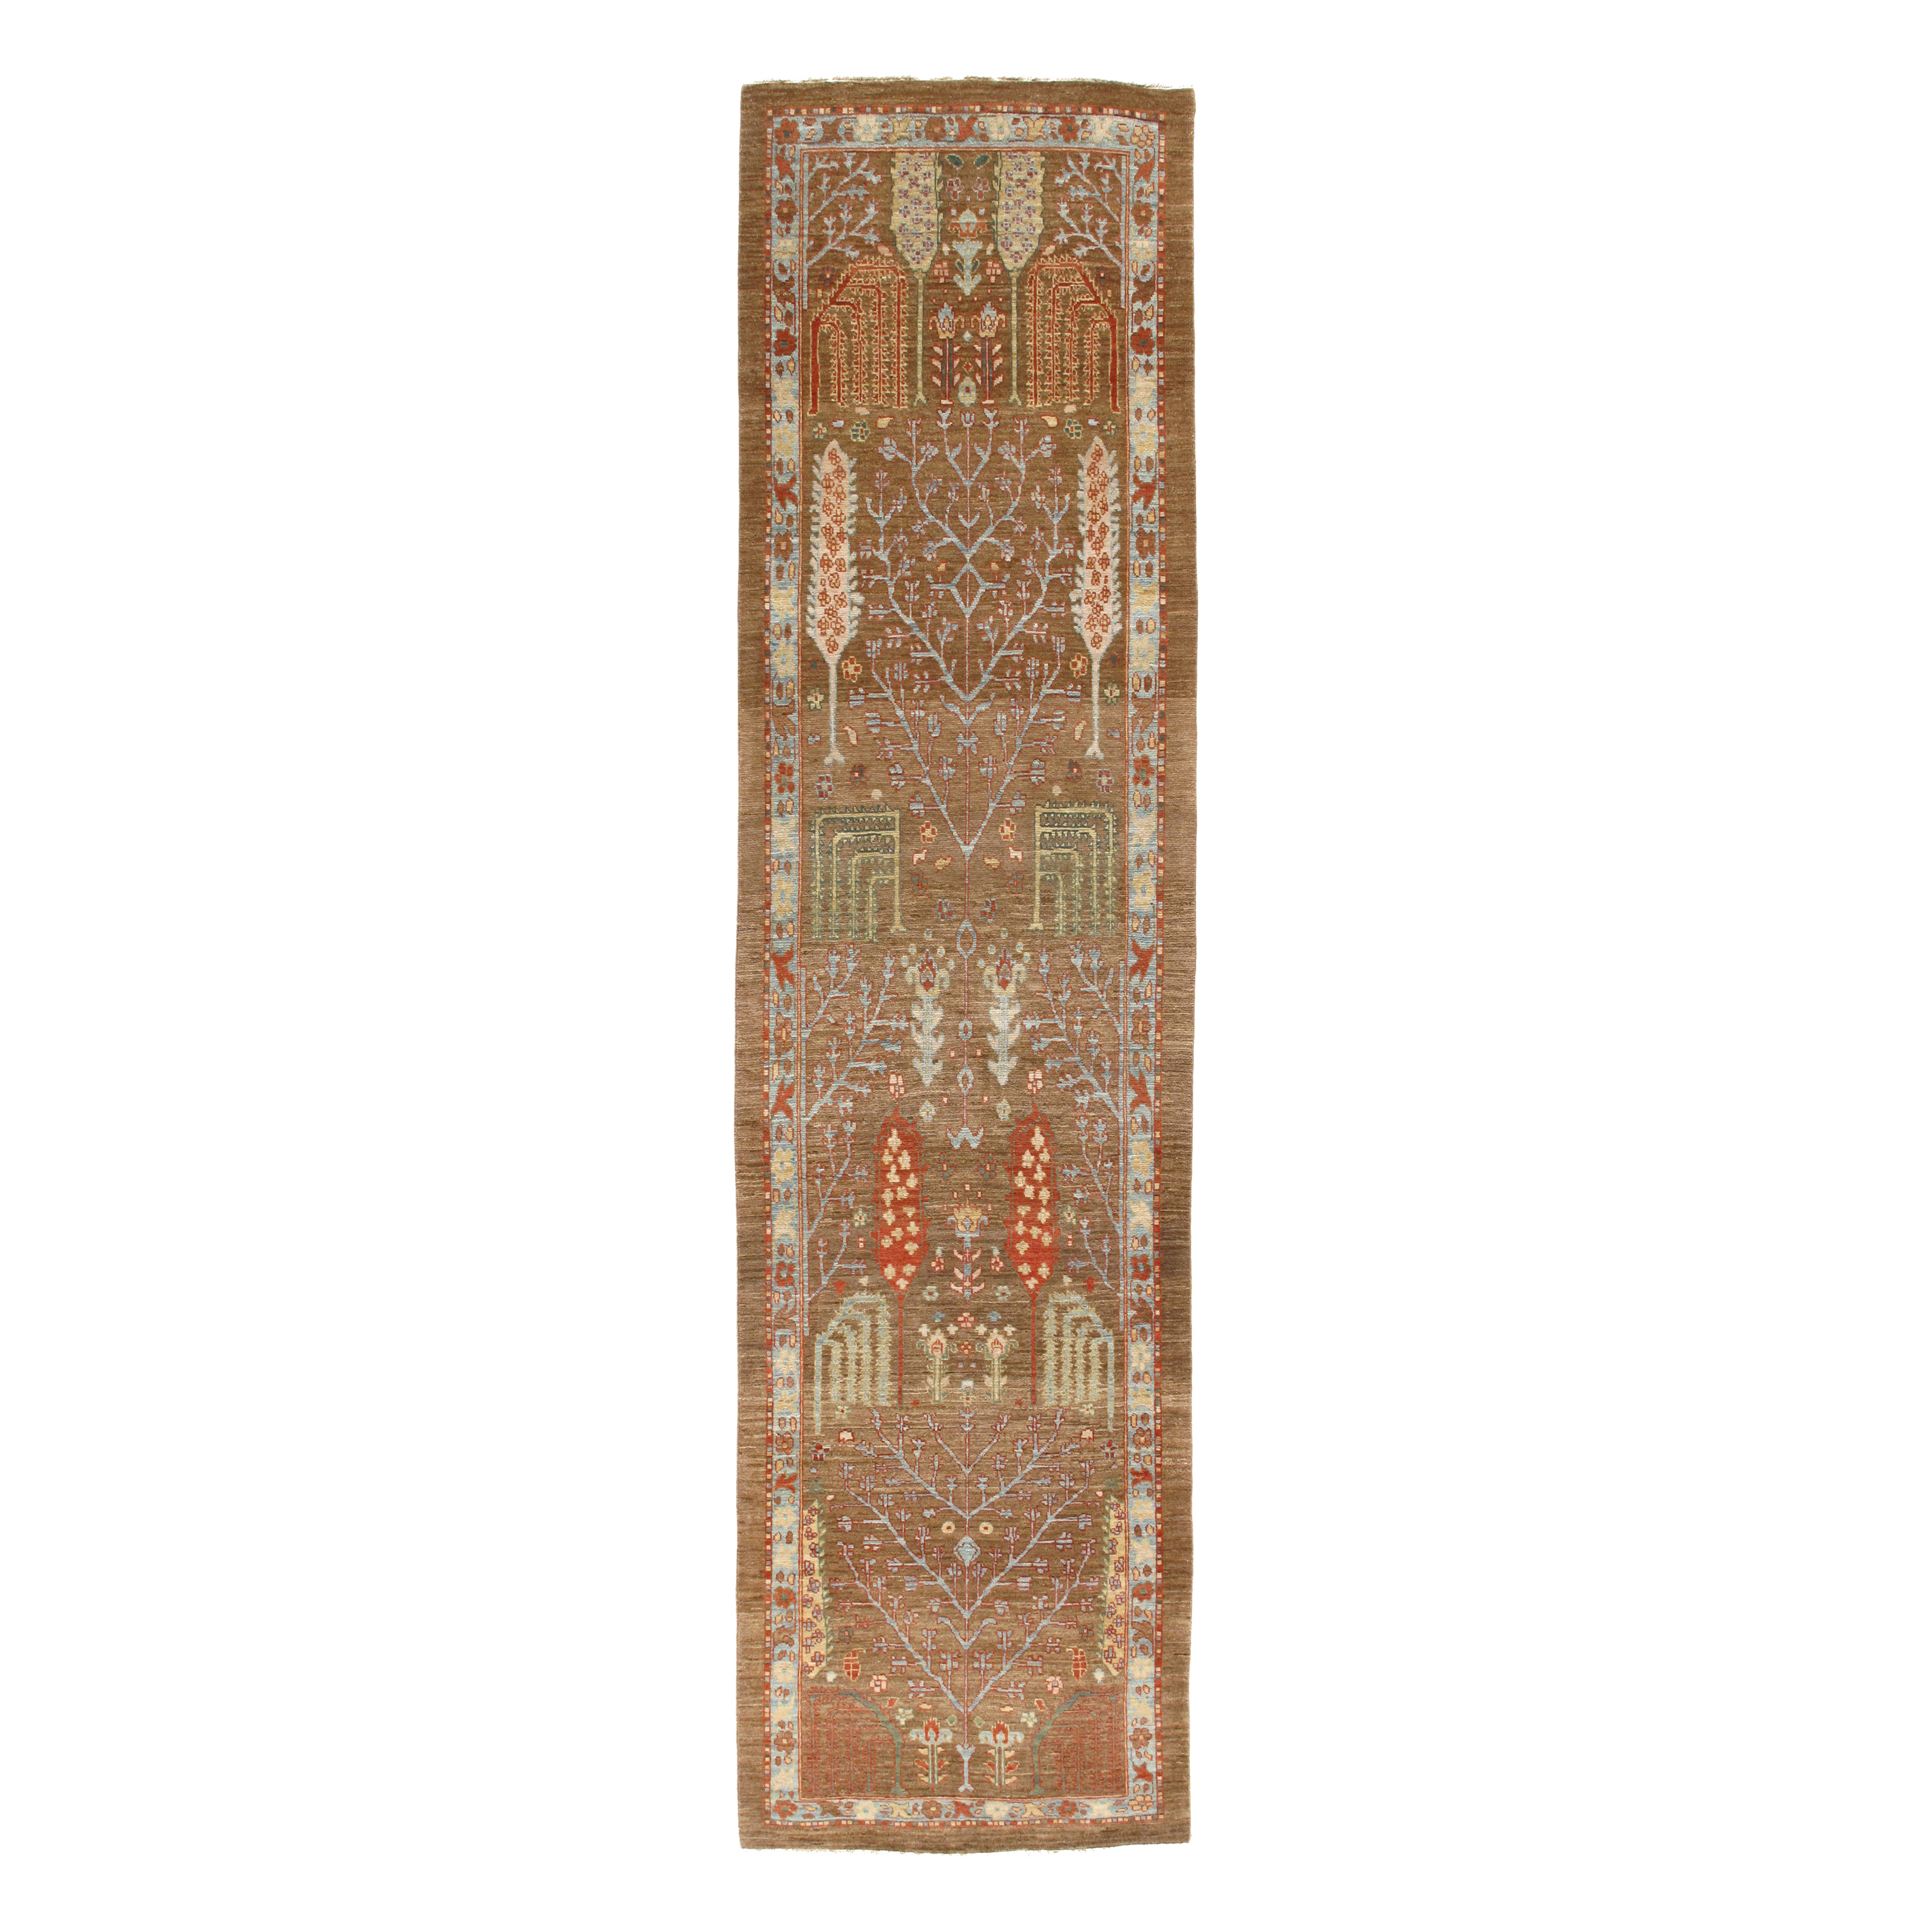 bakhshaiash runner is made with fine handcard wool. 